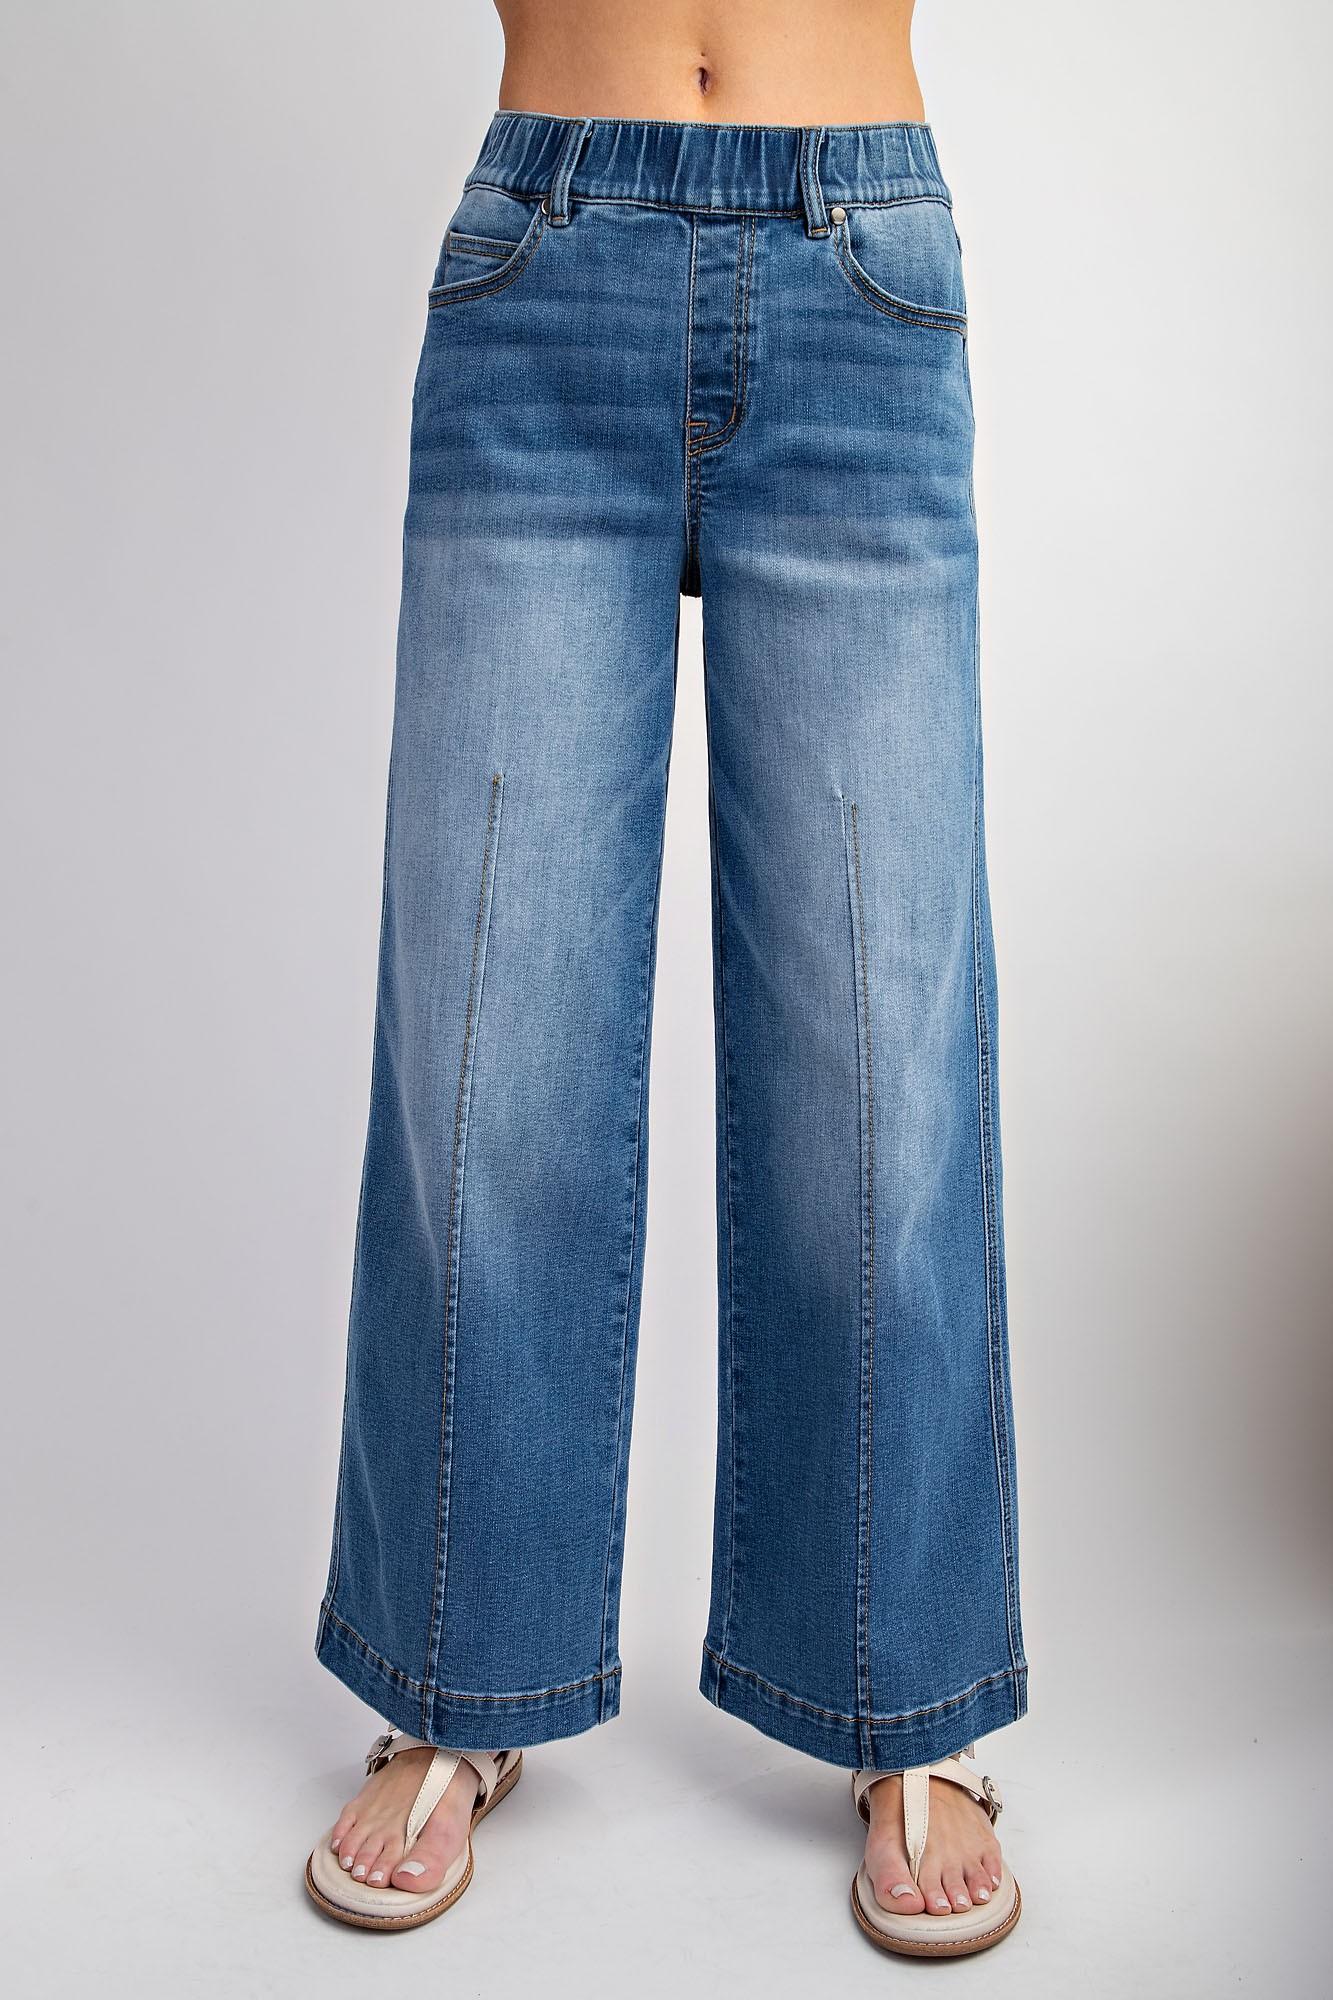 Come With Me Stretch Waisted Jeans